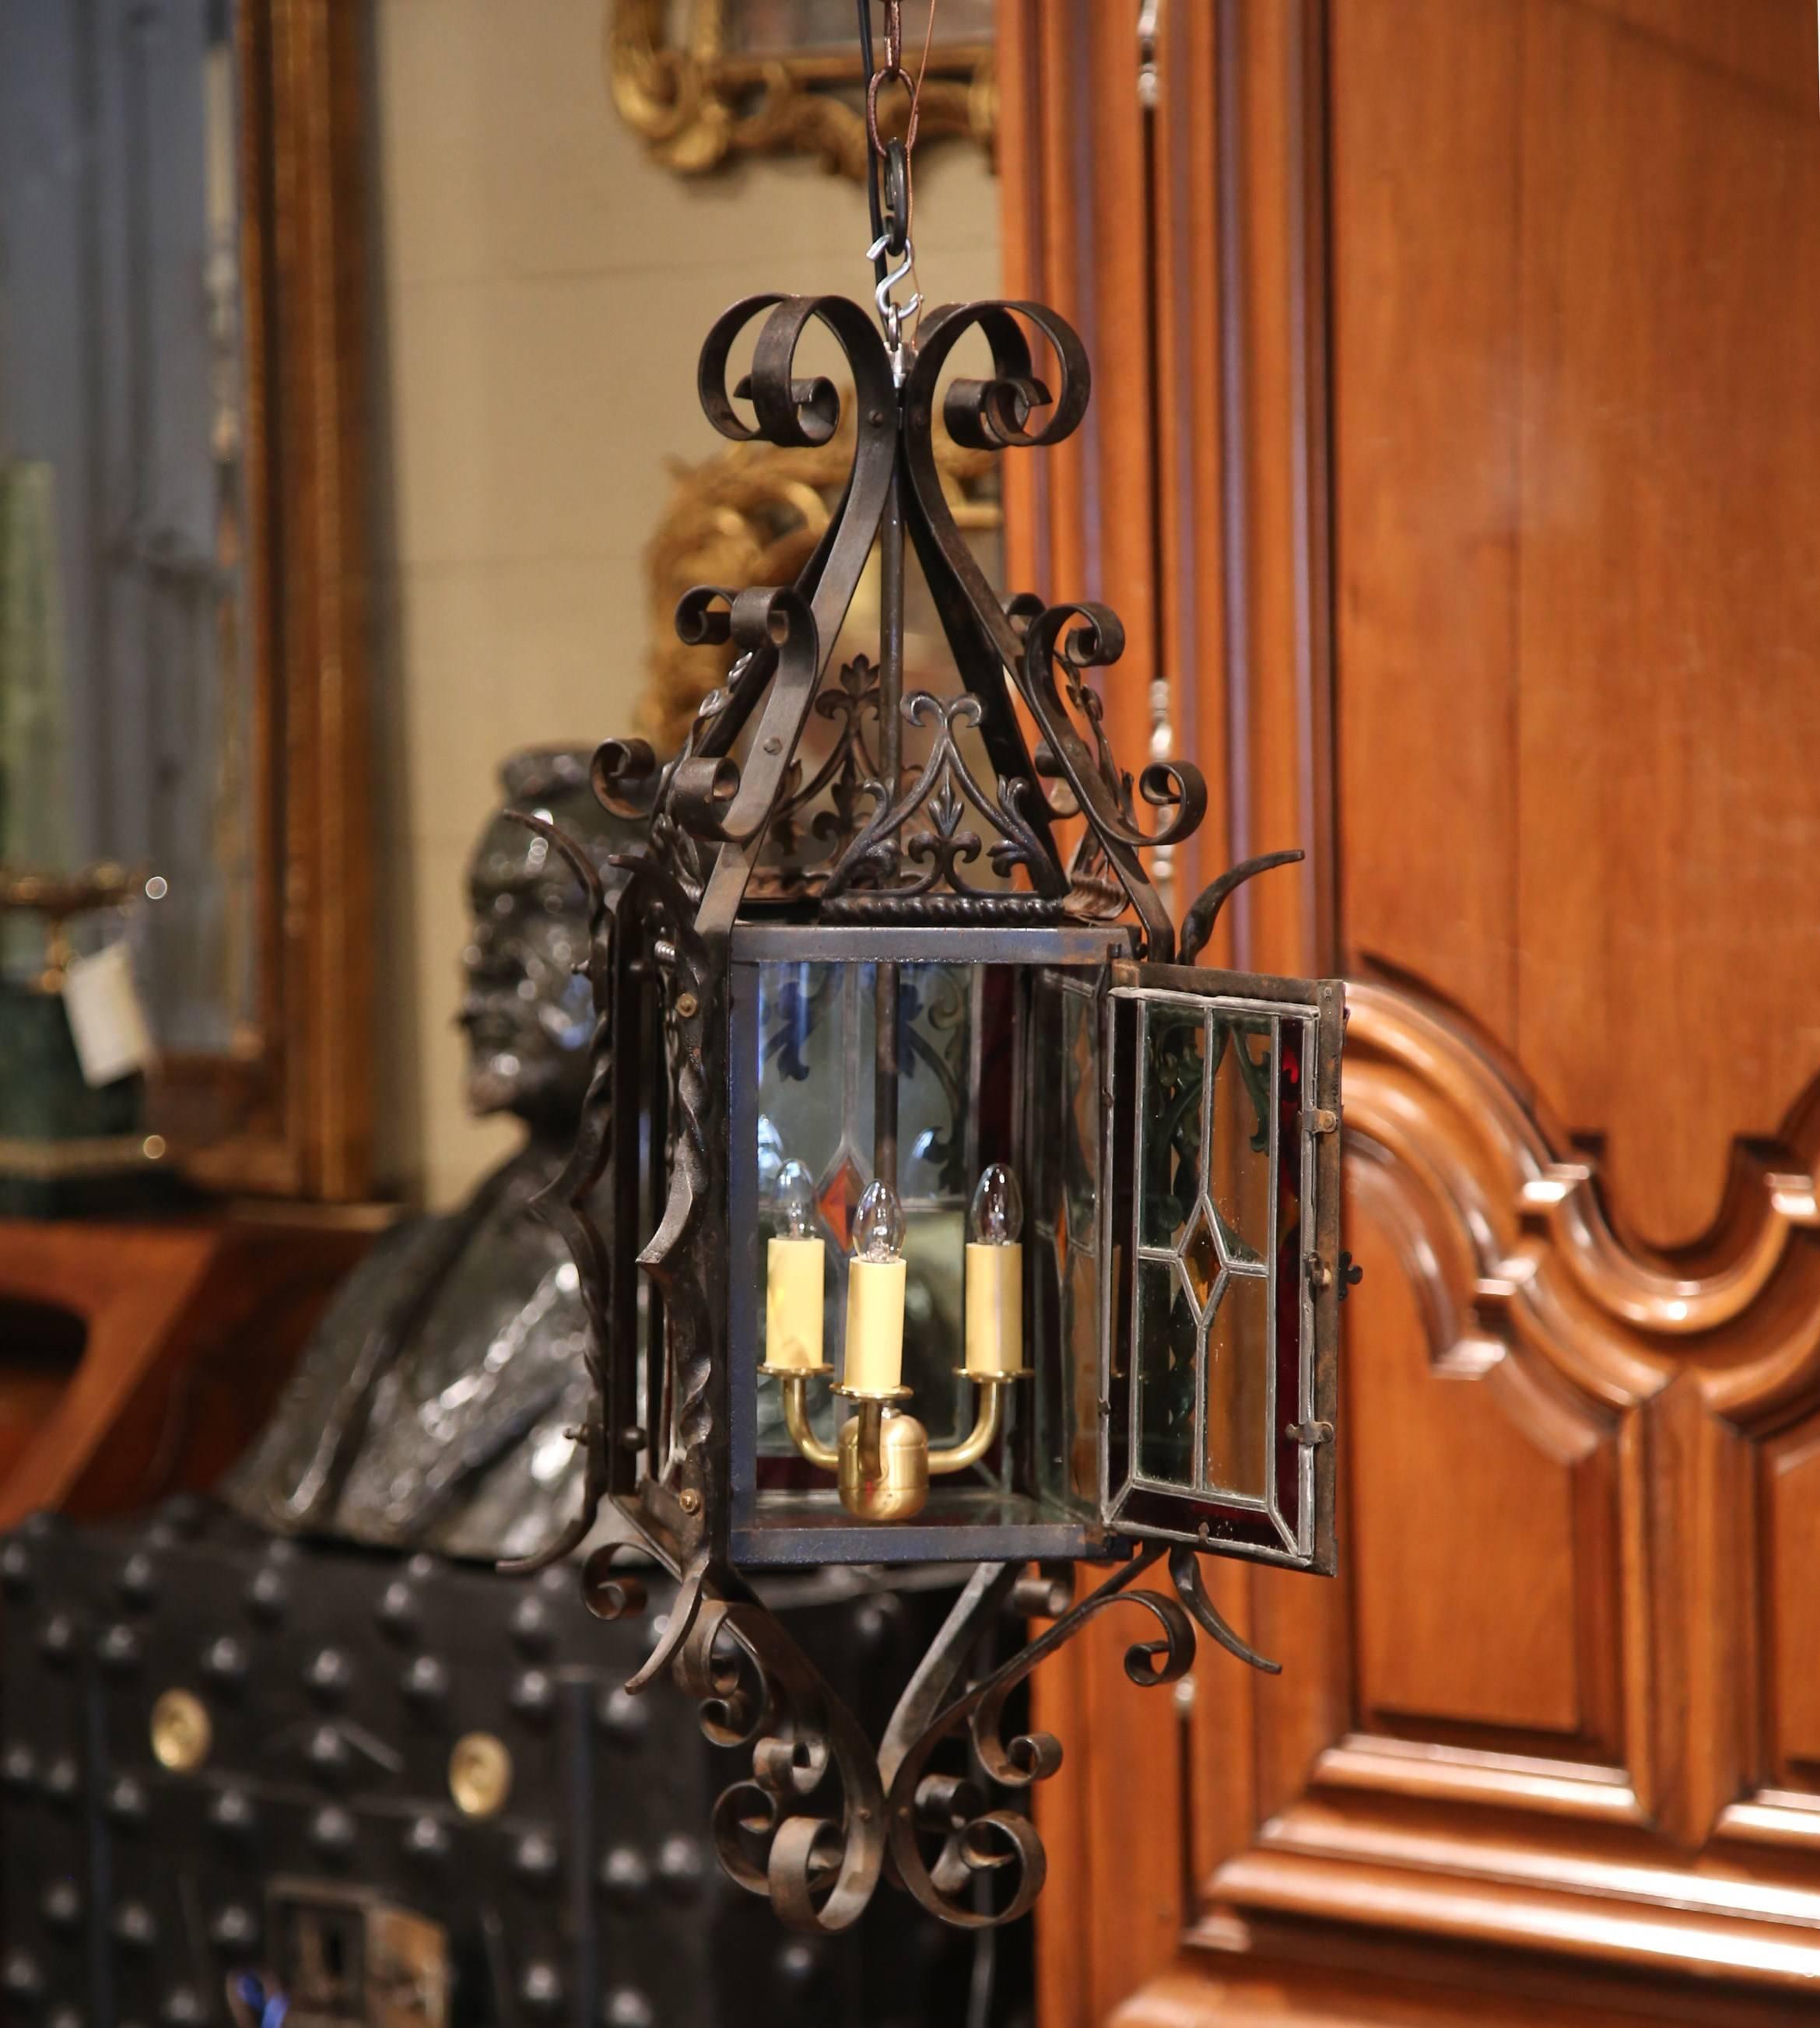 For a unique lighting feature, look no further than this elegant antique lantern; crafted circa 1870, the three-light chandelier features four painted, stained glass panels embellished with fleurs-de-lys, and a small door to access the inside light